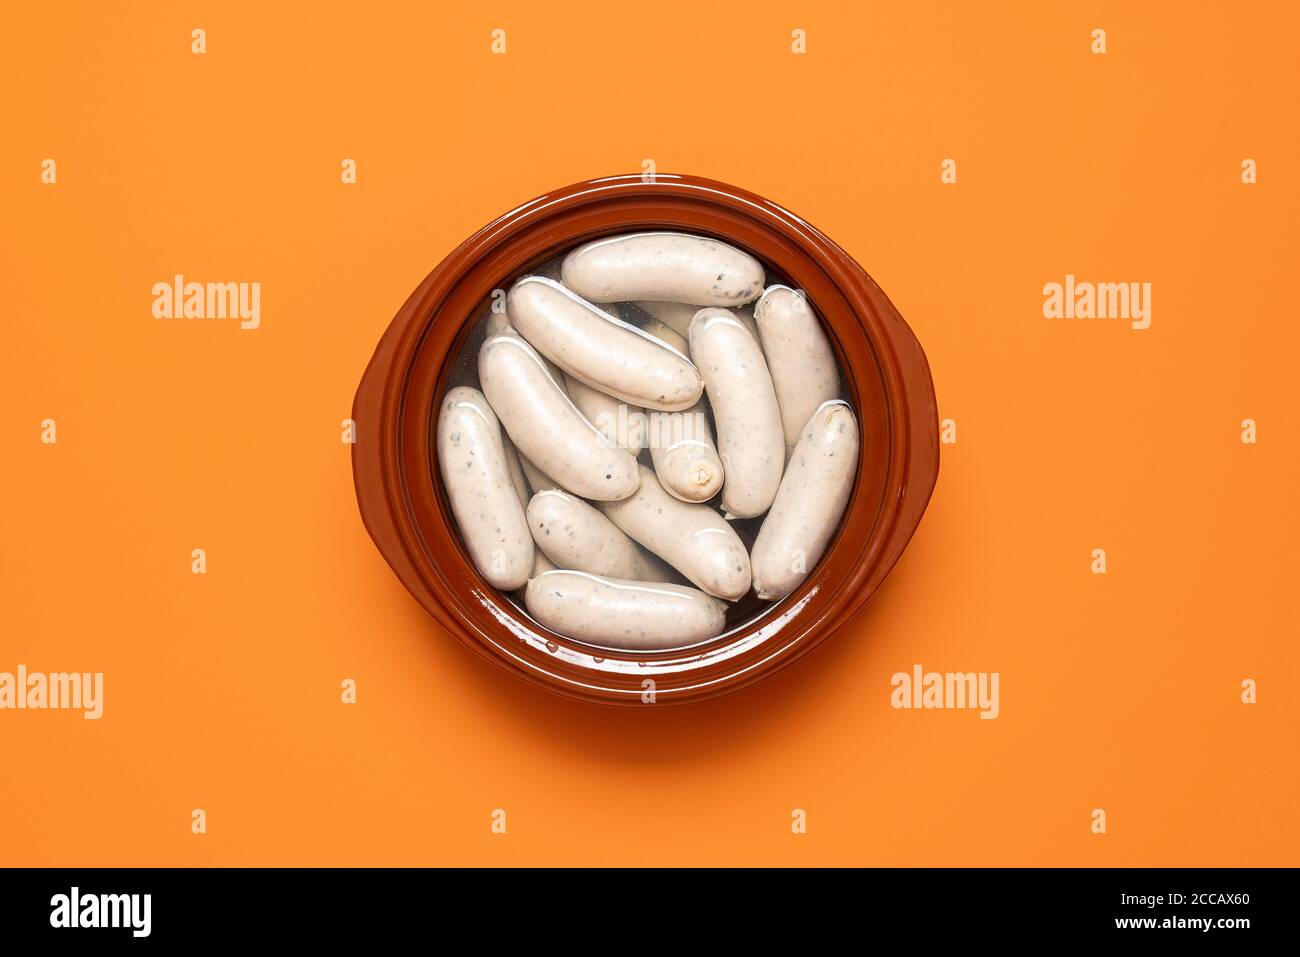 German white sausage boiled in a brown pot, isolated on orange background. Top view of weisswurst, bavarian veal sausage. Oktoberfest traditional food Stock Photo